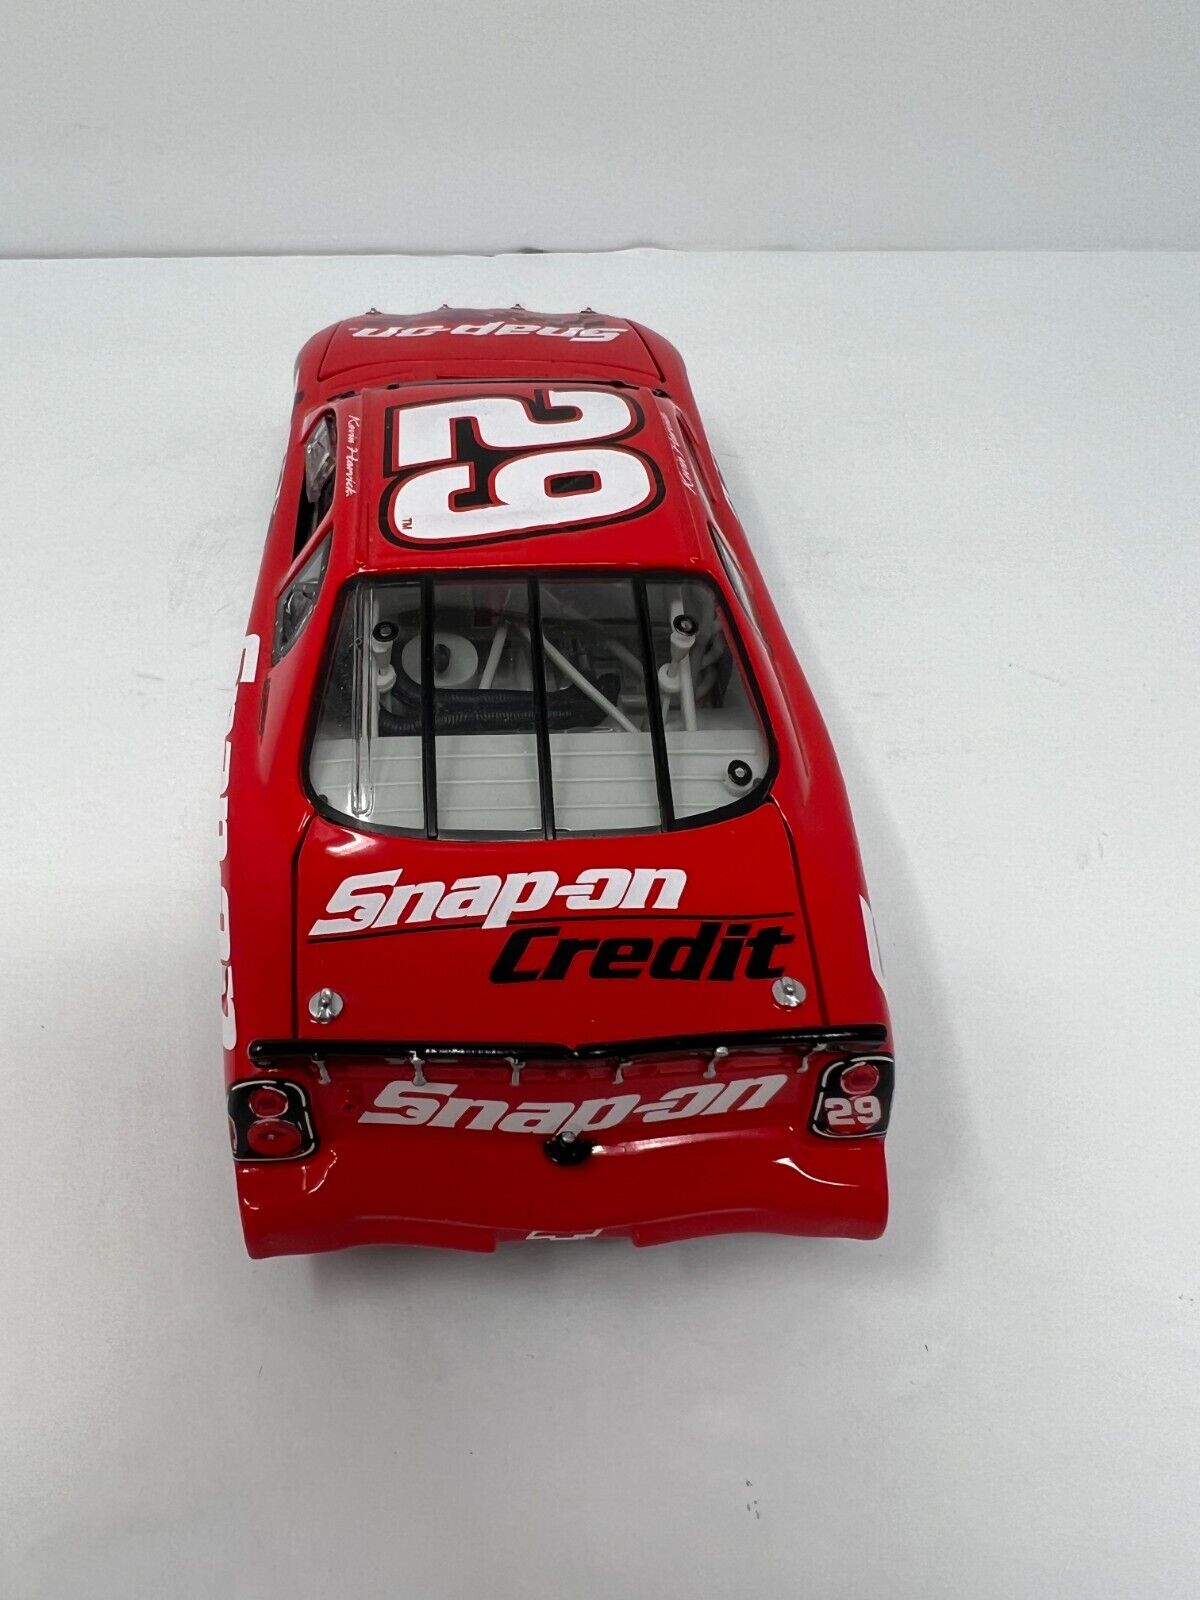 Action Nascar #29 Kevin Harvick Snap-On 2002 Chevy Monte Carlo 1:24 Diecast